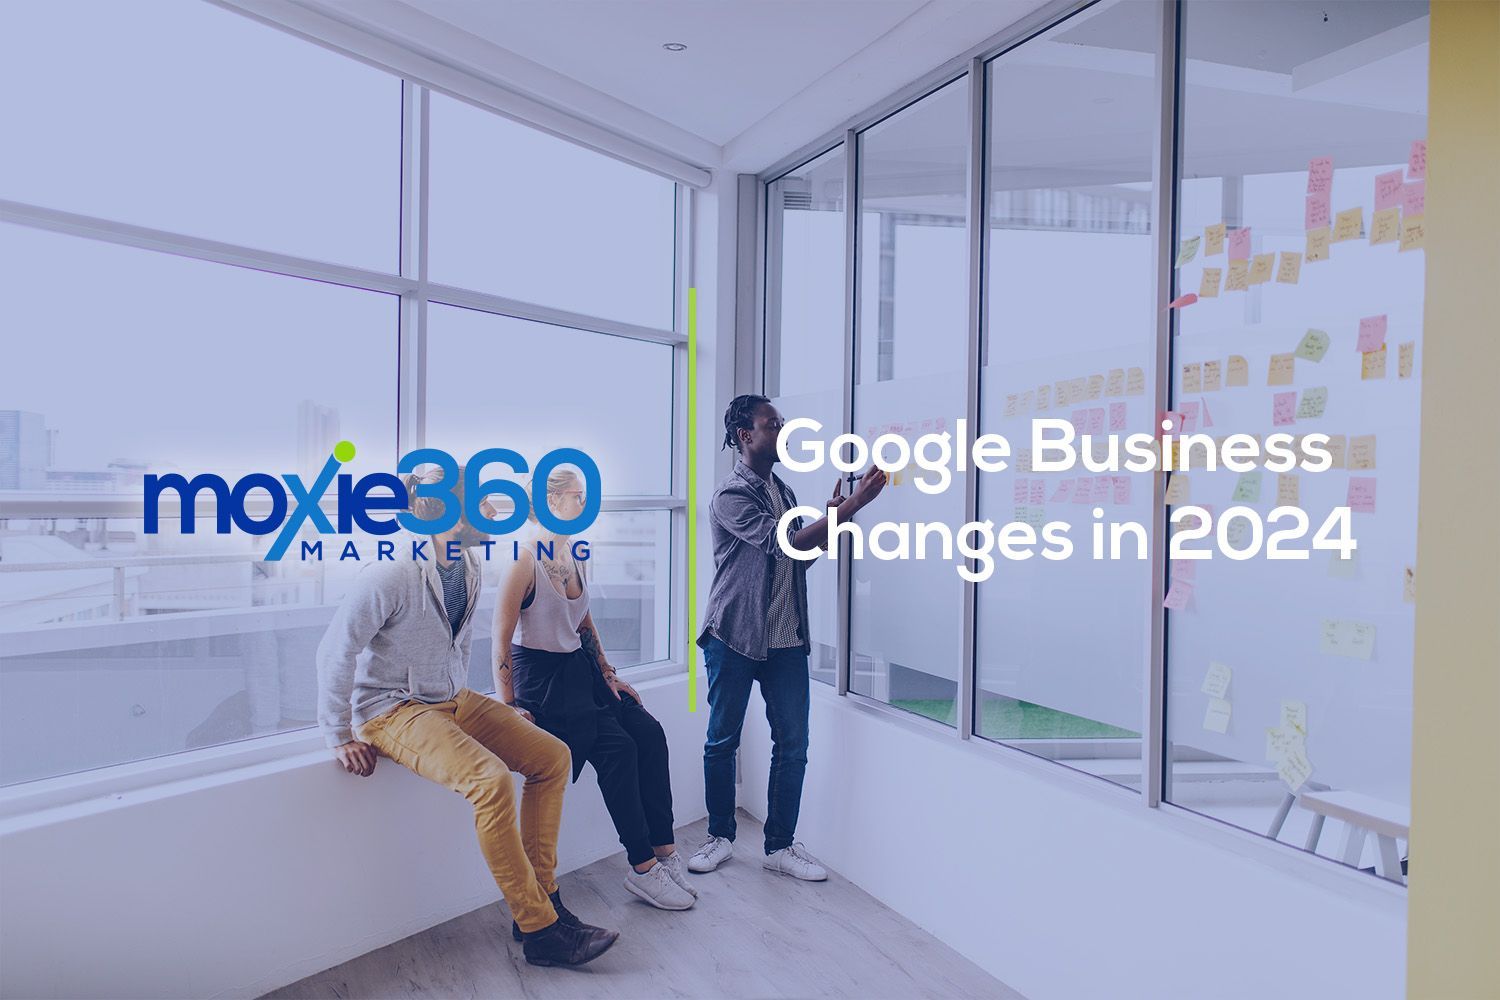 Google Business Changes in 2024 | Moxie360 Marketing